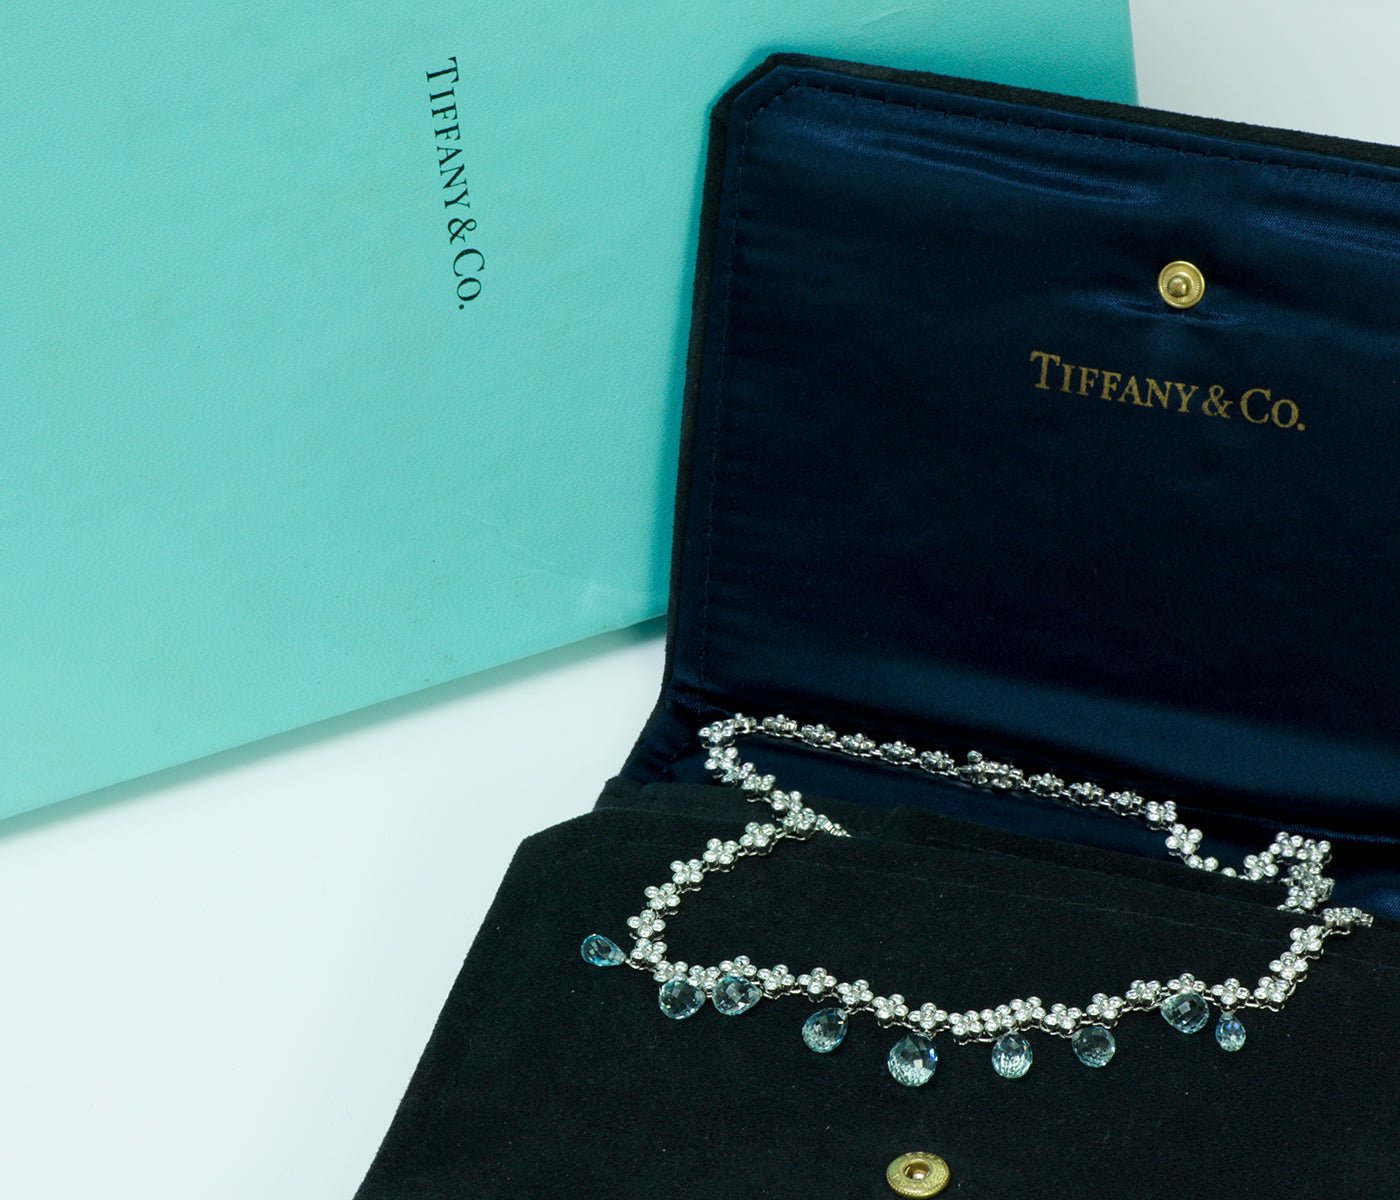 Tiffany's Blue Book Collection Turns 173, Let’s Celebrate! - DSF Antique Jewelry